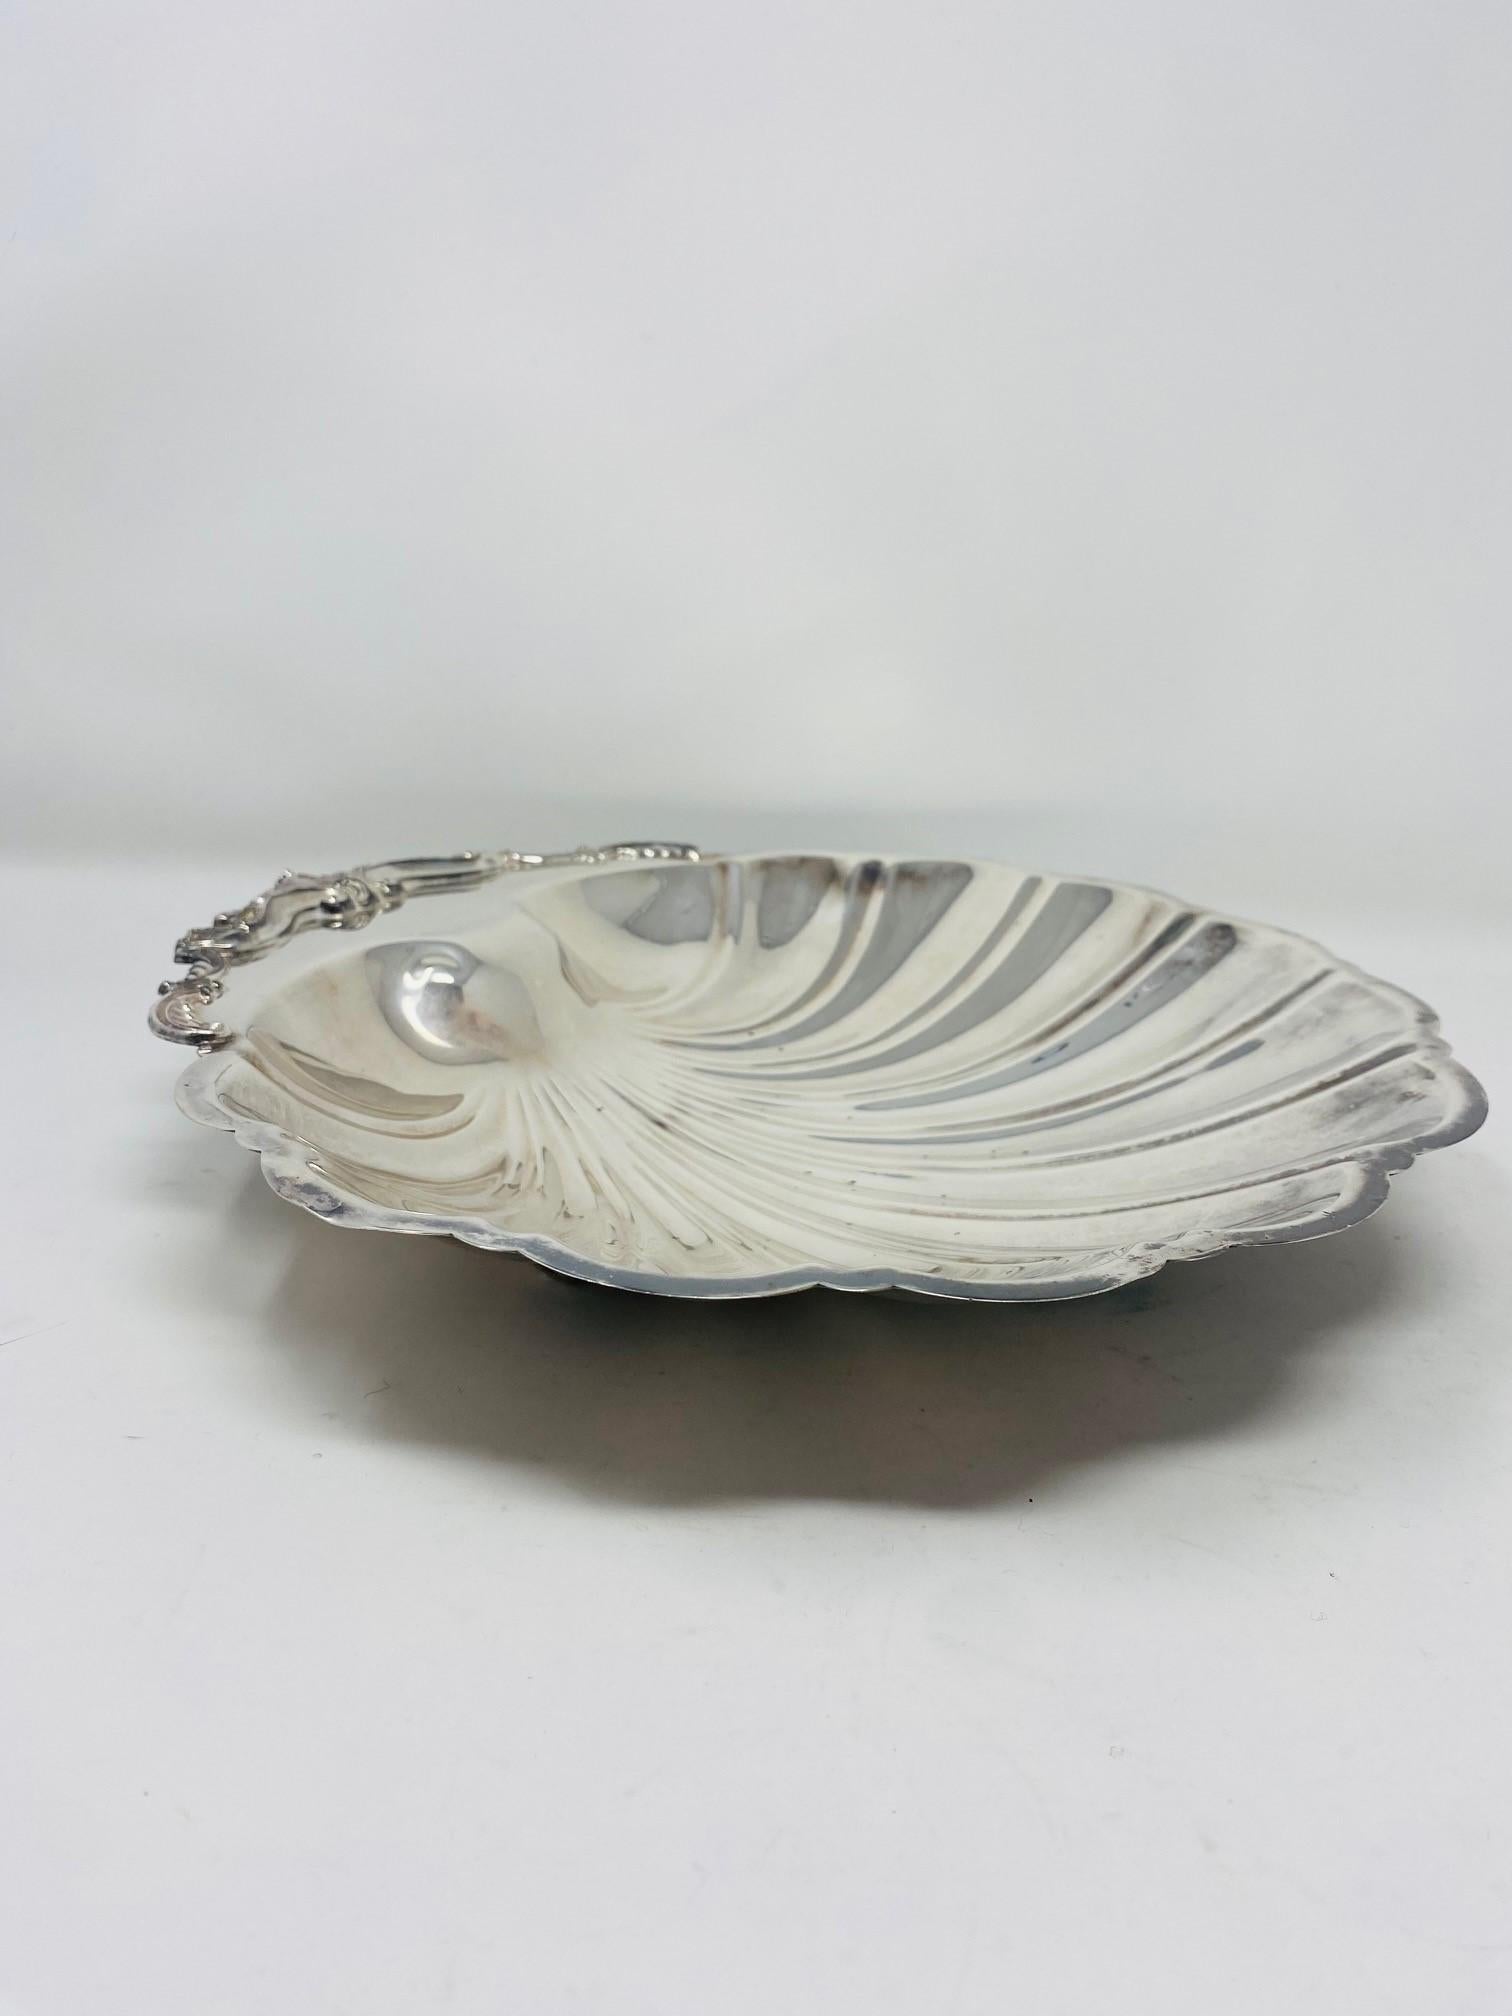 Antique FB Rogers Silver Co 1824 Silver Plated Footed Shell Dish 1